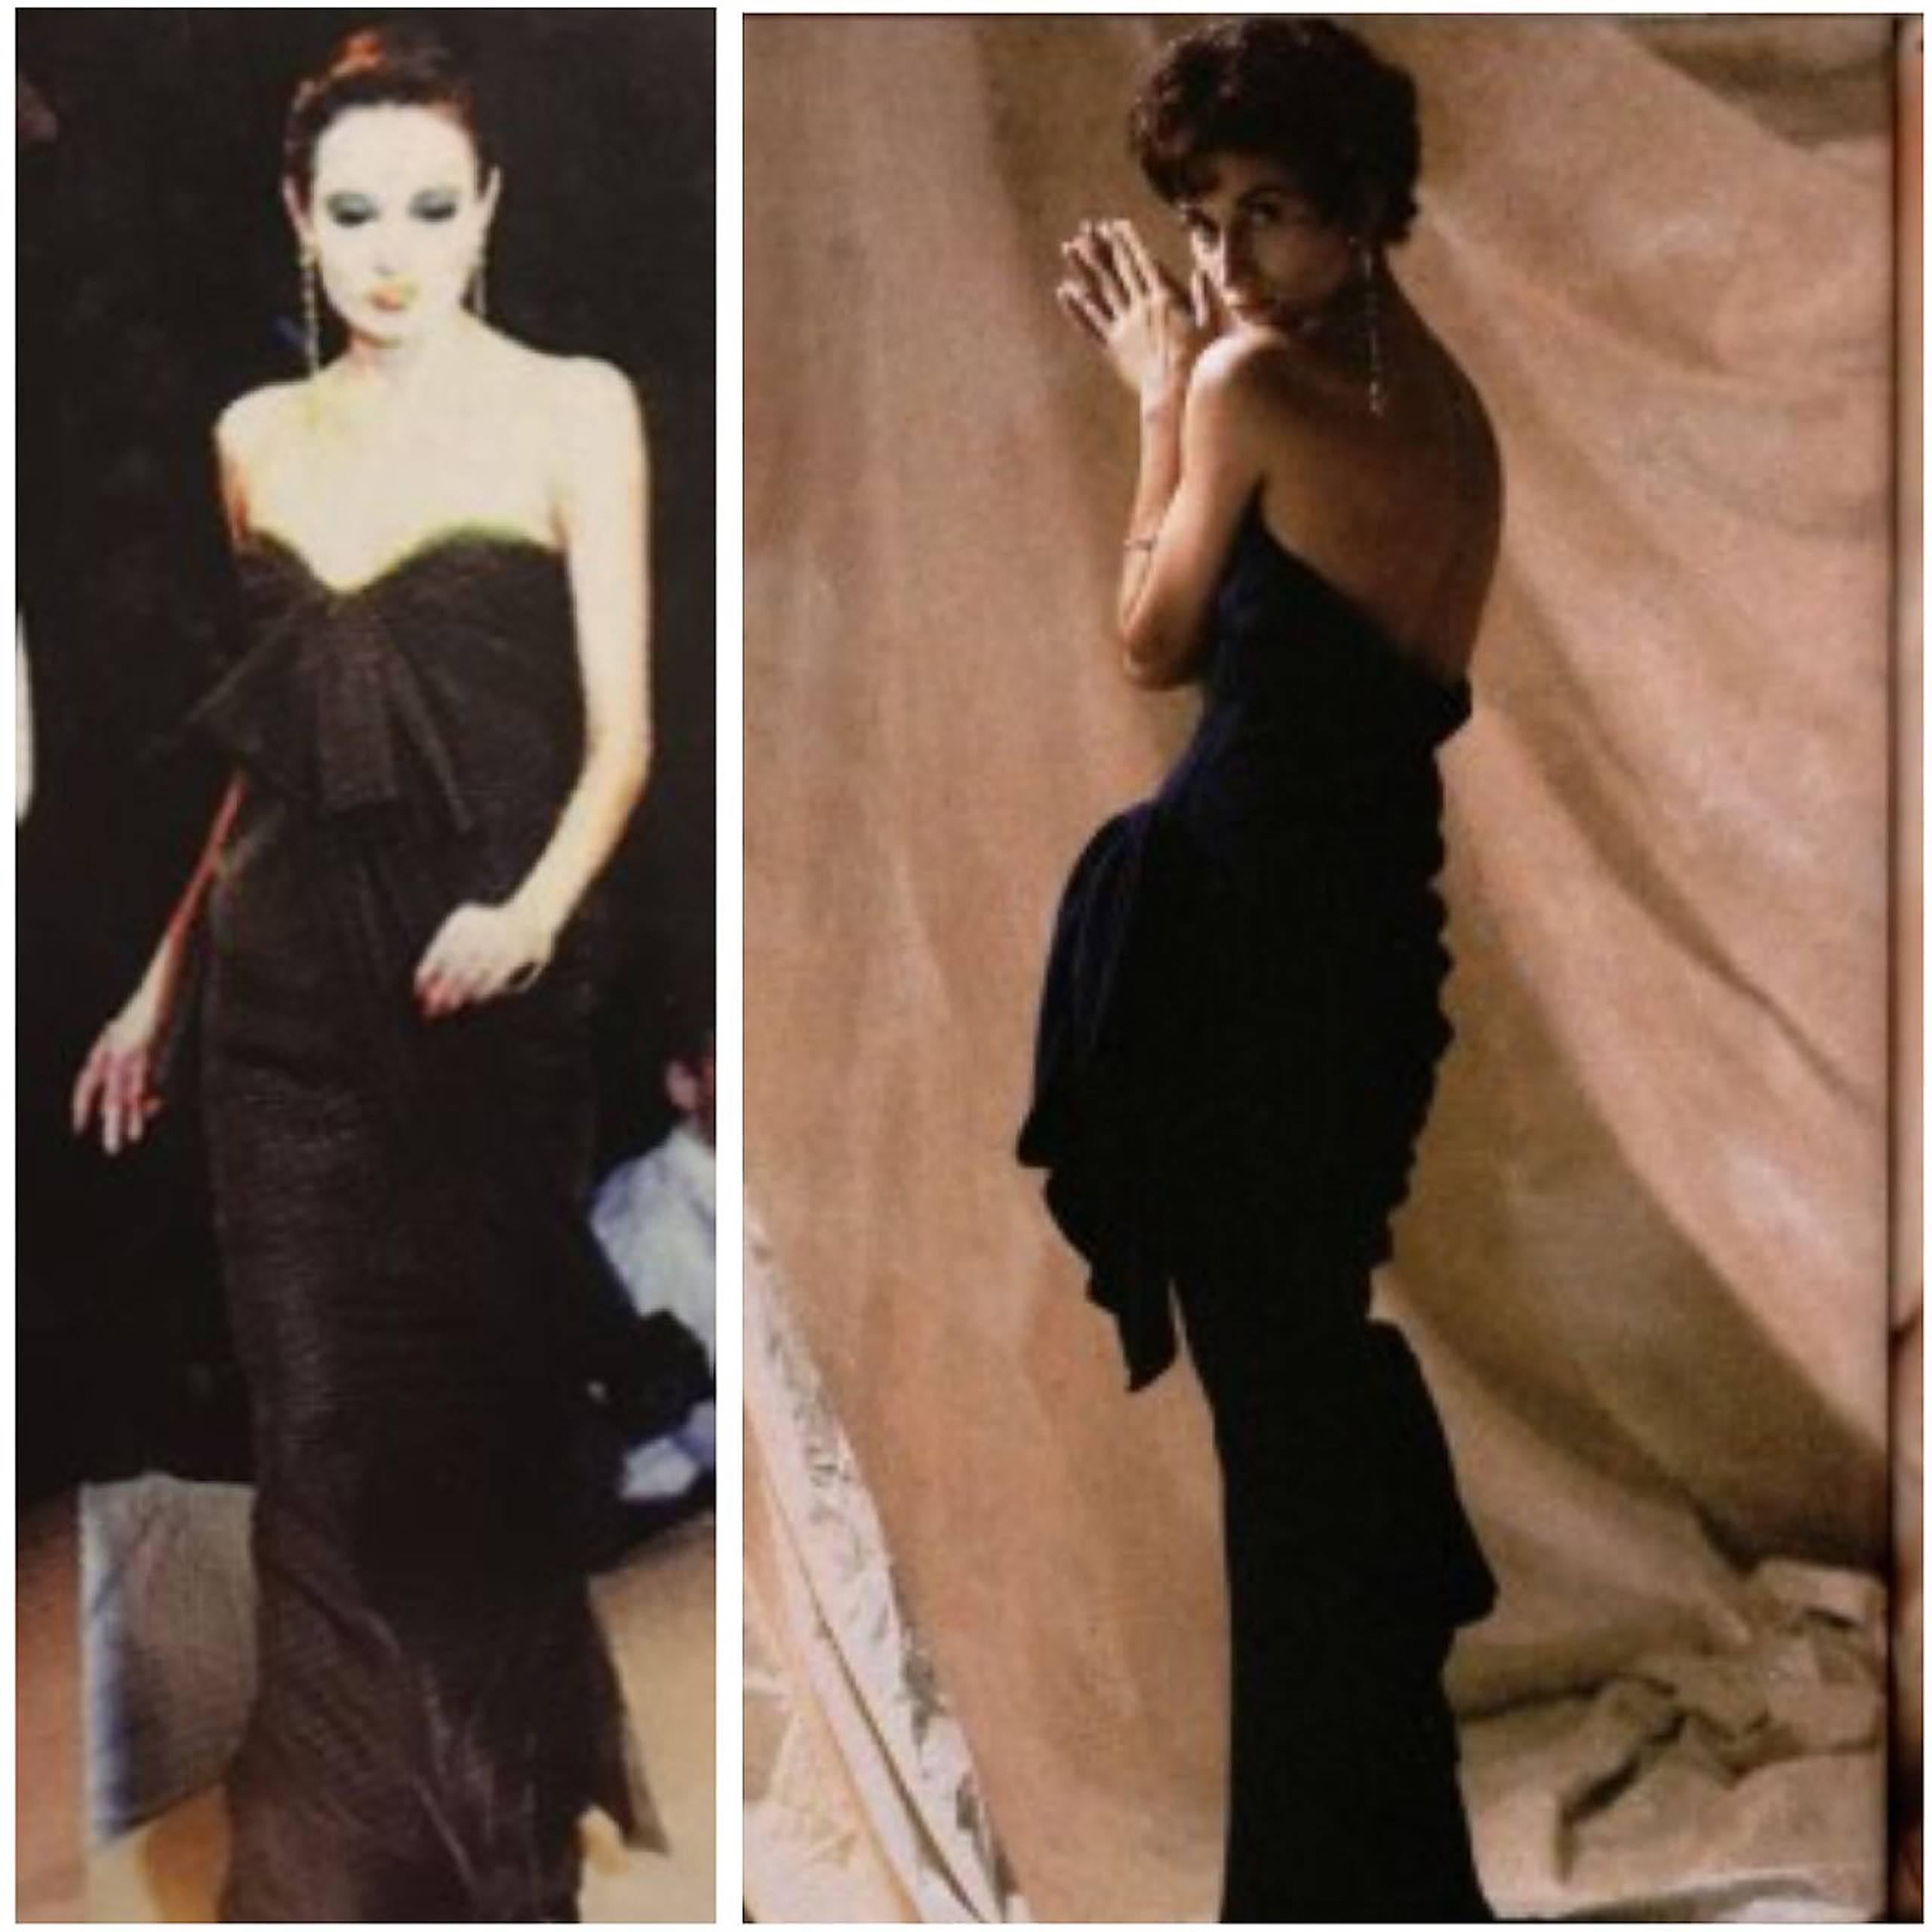 Breathtaking Yves Saint Laurent Haute-Couture gown from his iconic 1987 spring-summer collection. It is insanely chic with its unique architectural wrapped construction. The fabric is a luxurious mocha brown silk-crepe complete with inner boned